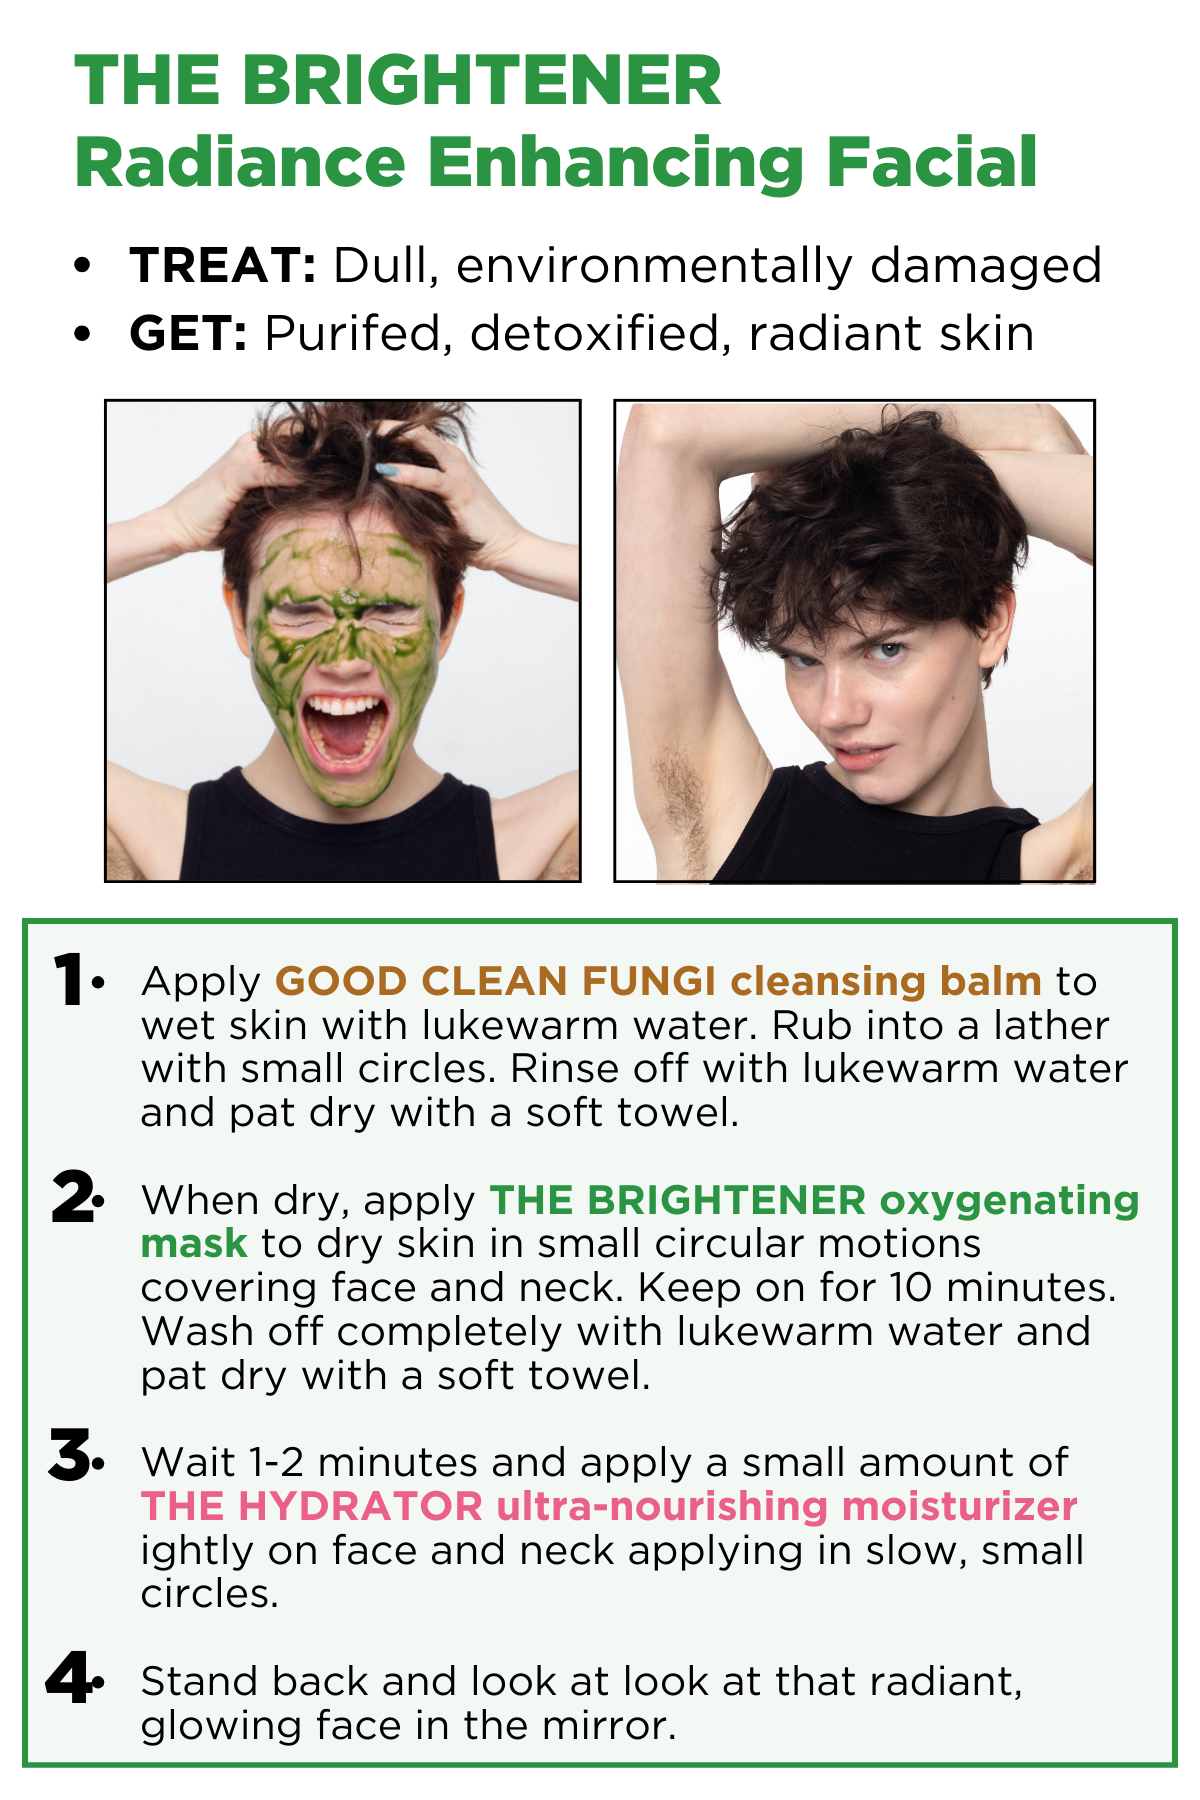 The steps for doing The Brightener Radiance Enhancing Facial